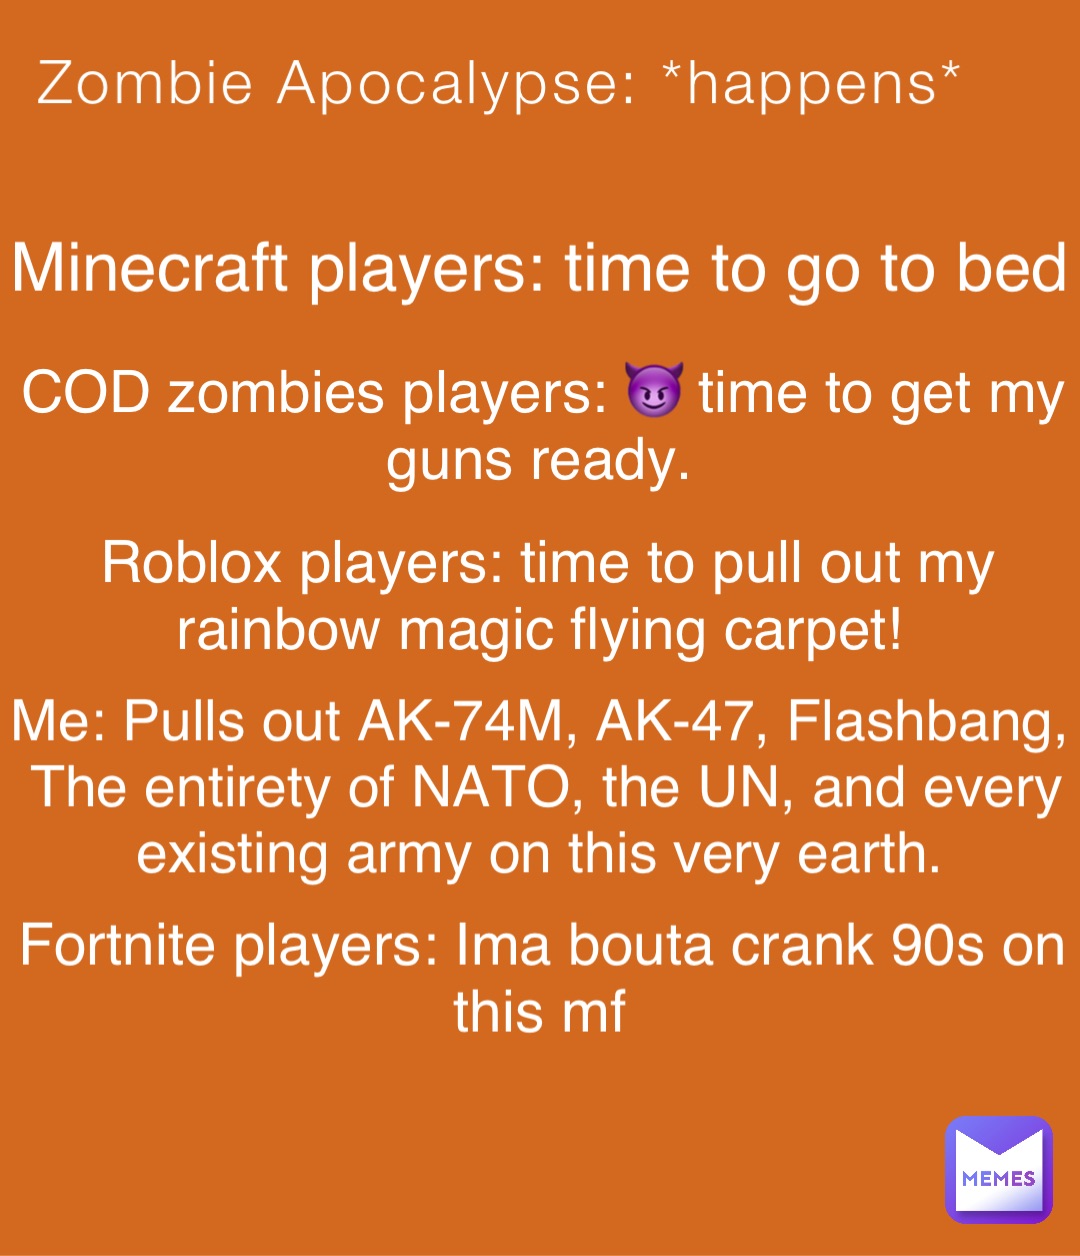 Zombie Apocalypse: *happens* Minecraft players: time to go to bed COD zombies players: 😈 time to get my guns ready. Roblox players: time to pull out my rainbow magic flying carpet! Me: Pulls out AK-74M, AK-47, Flashbang, The entirety of NATO, the UN, and every existing army on this very earth. Fortnite players: Ima bouta crank 90s on this mf